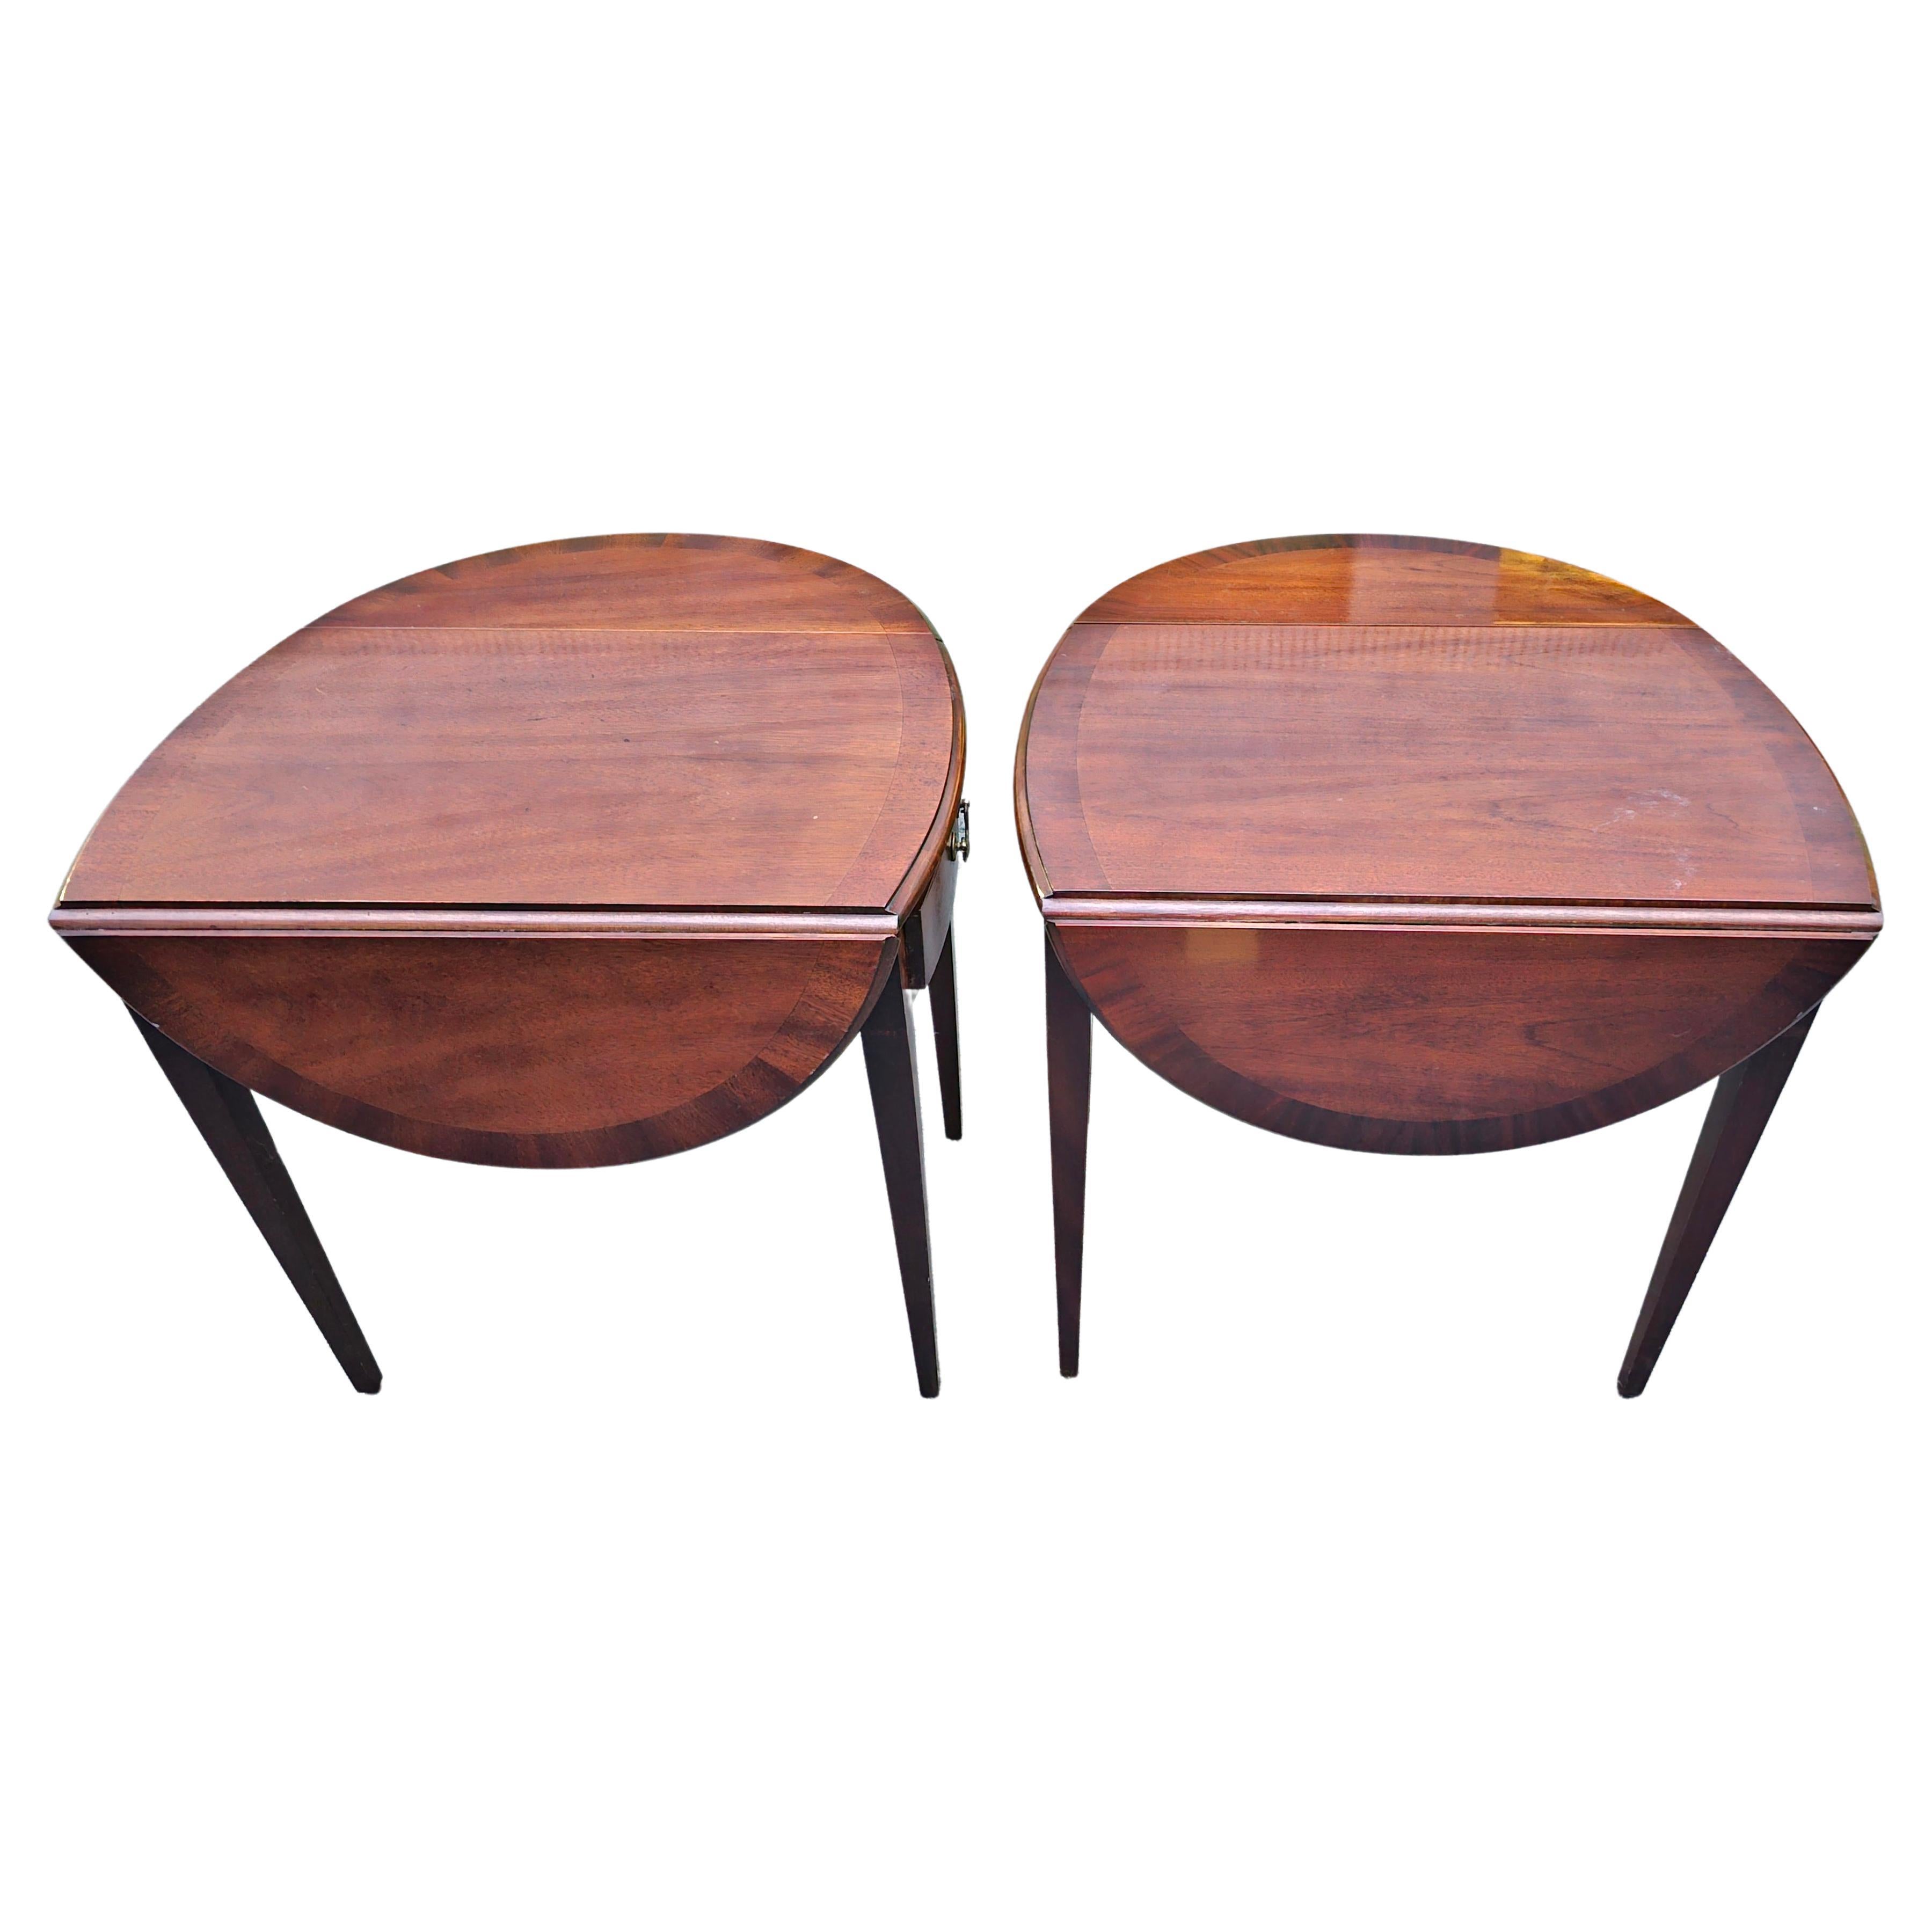 20th Century Pair of Magogany Banded and Satinwood Inlaid Pembroke Drop-Leaf Side Tables